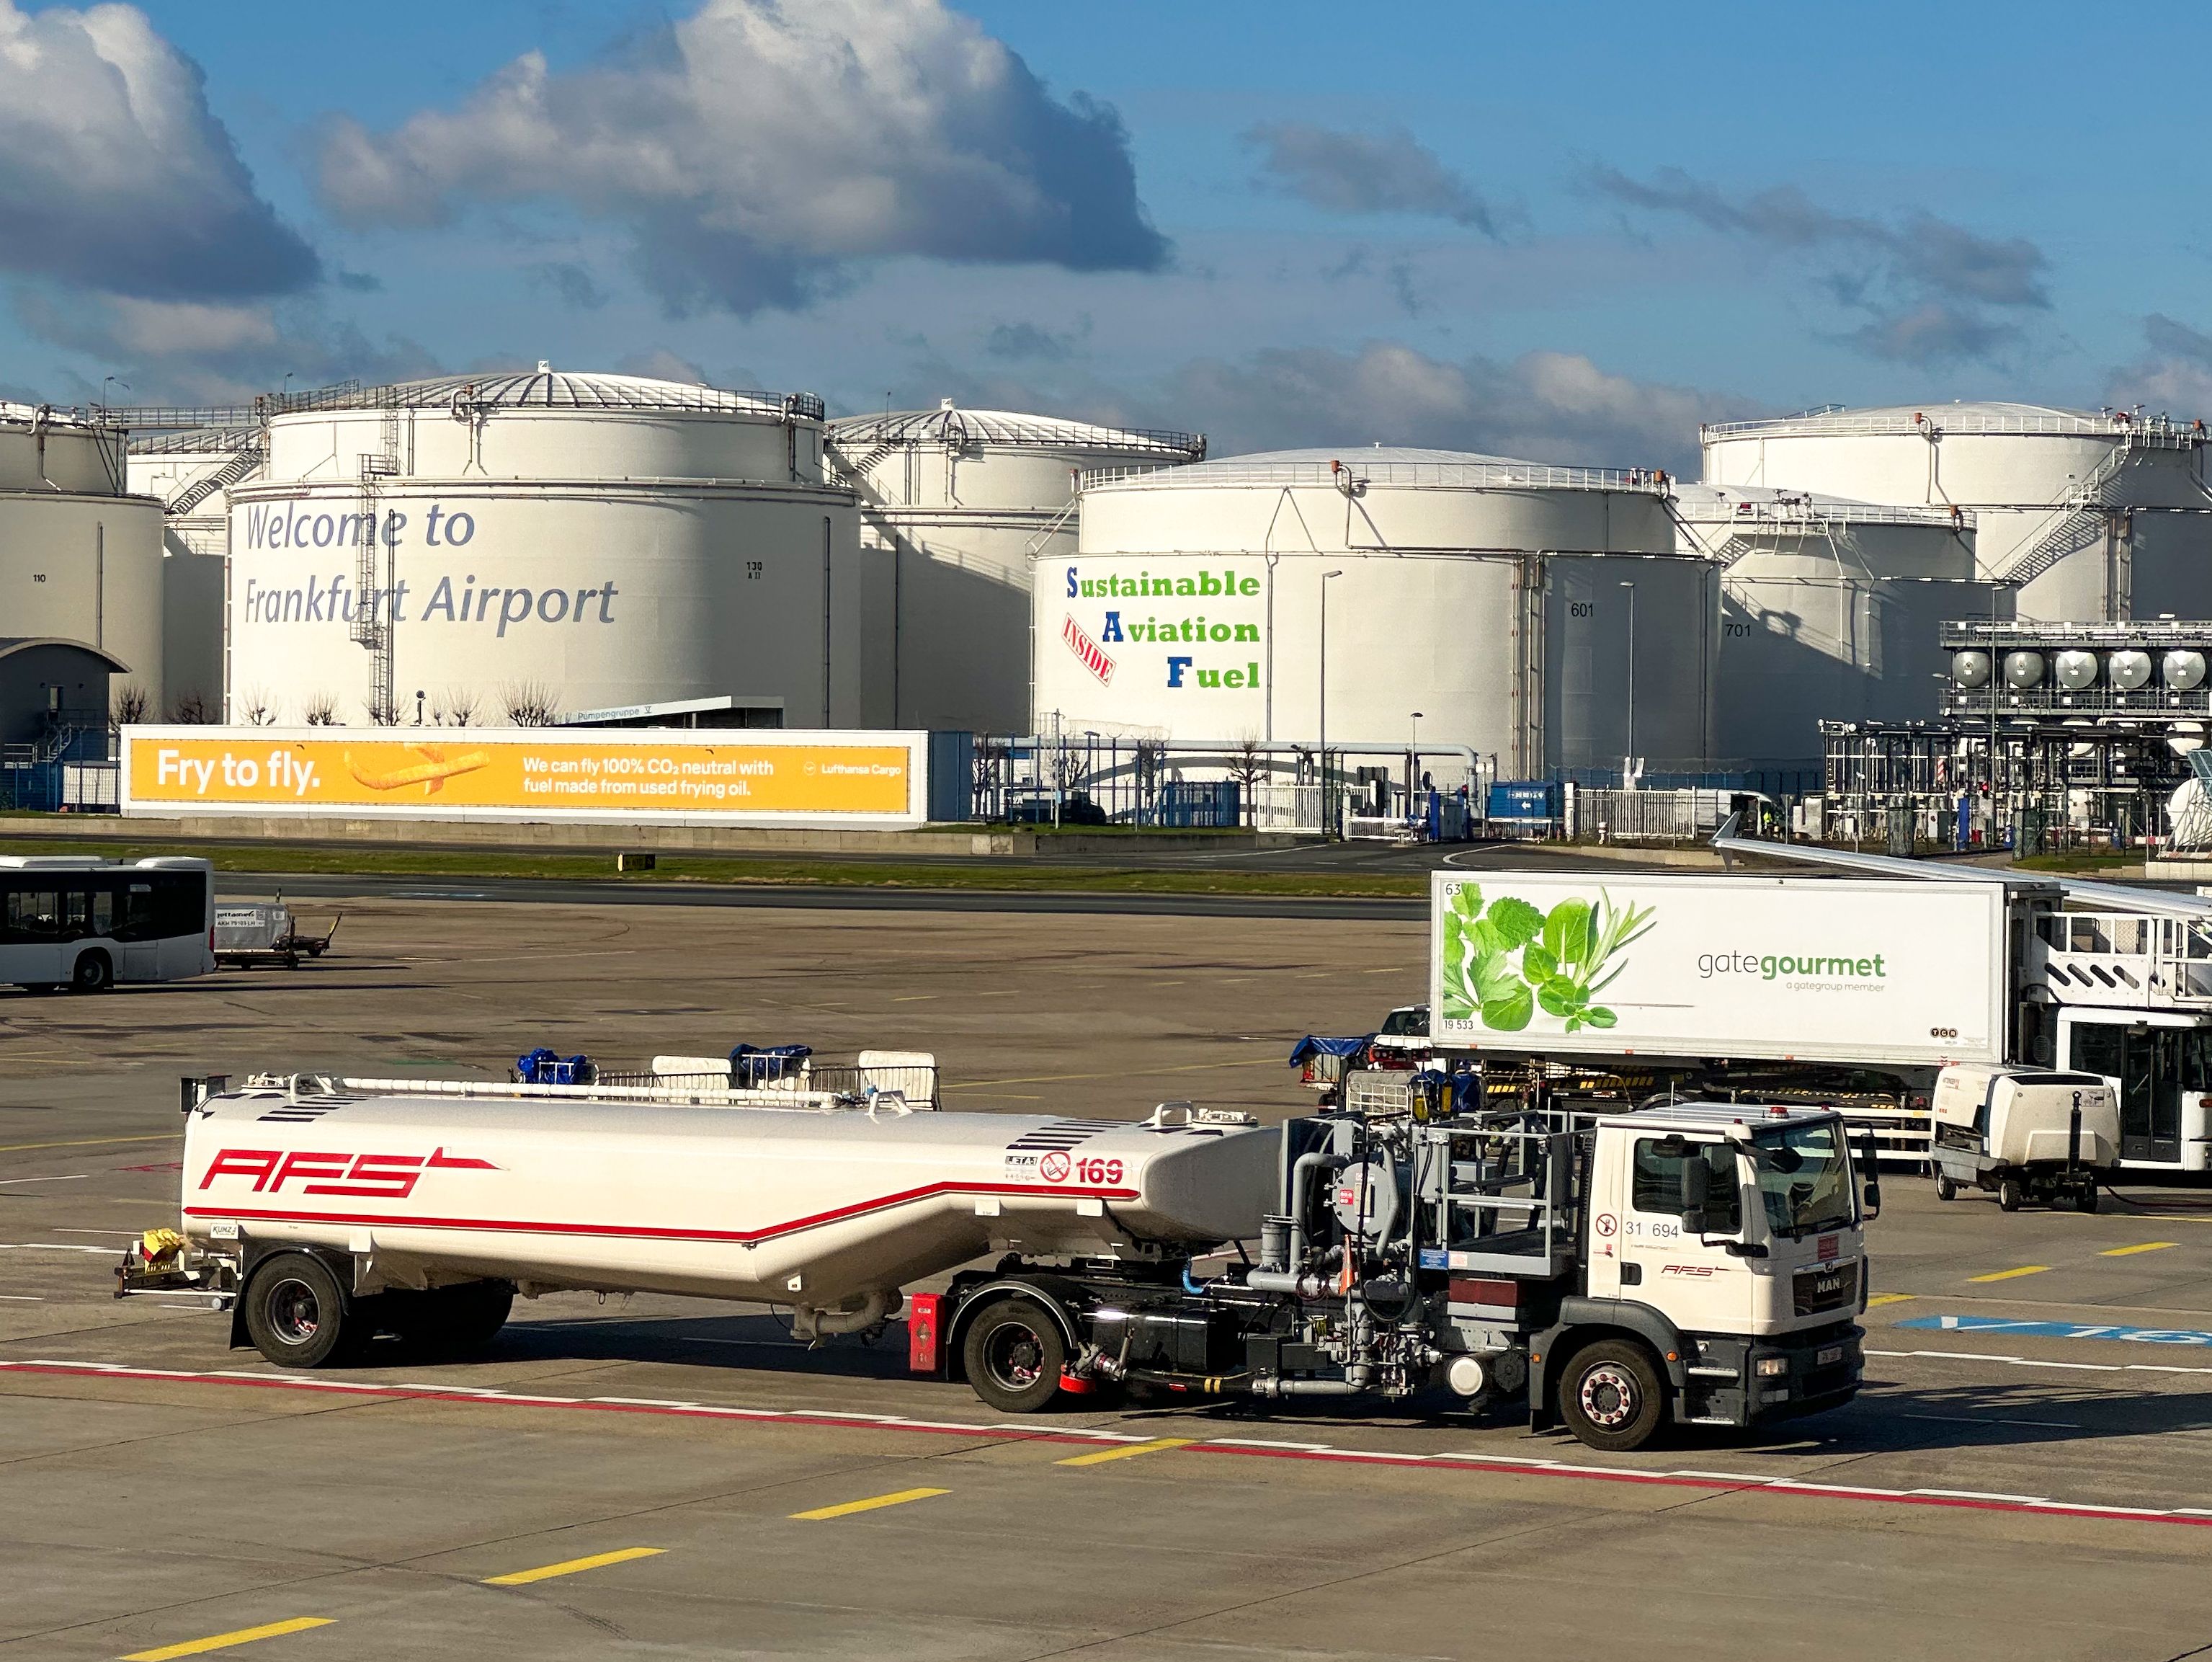 Sustainable_Aviation_Fuel_advertisment_at_frankfurt_airport